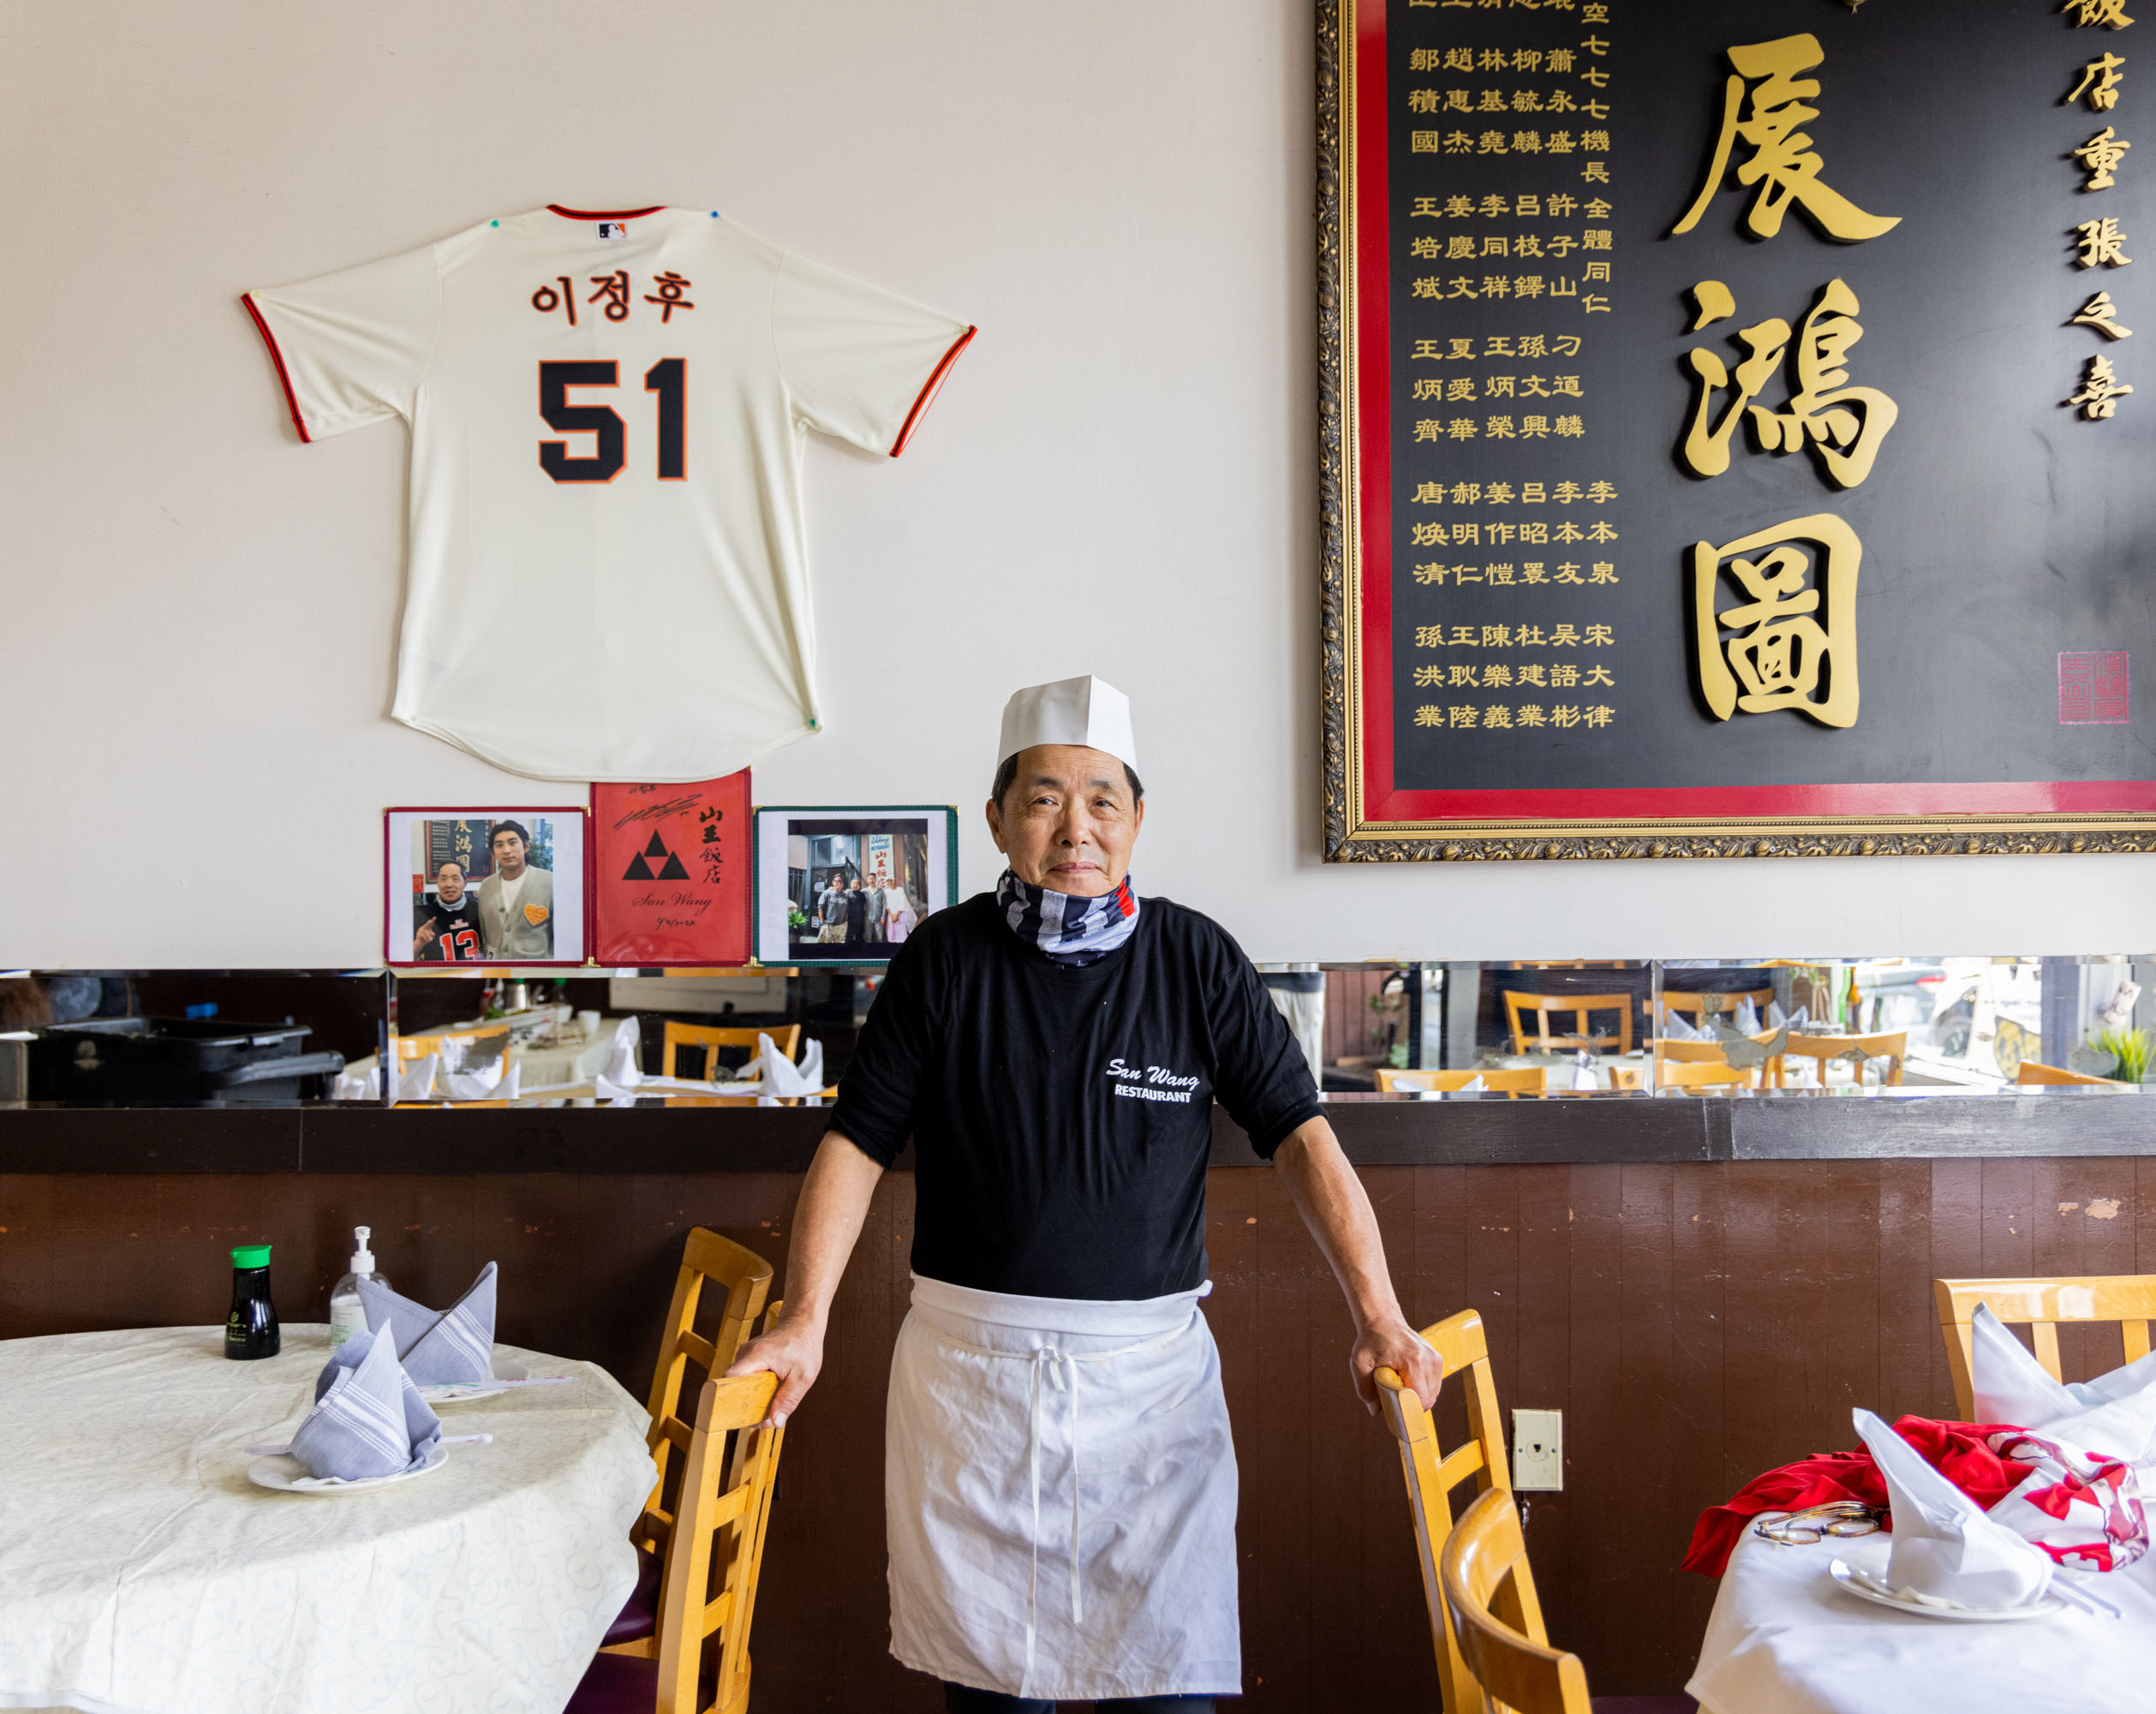 A man dressed as a chef stands in a restaurant beside tables with folded napkins. Behind him are a framed sports jersey, photos, and a large board with text.